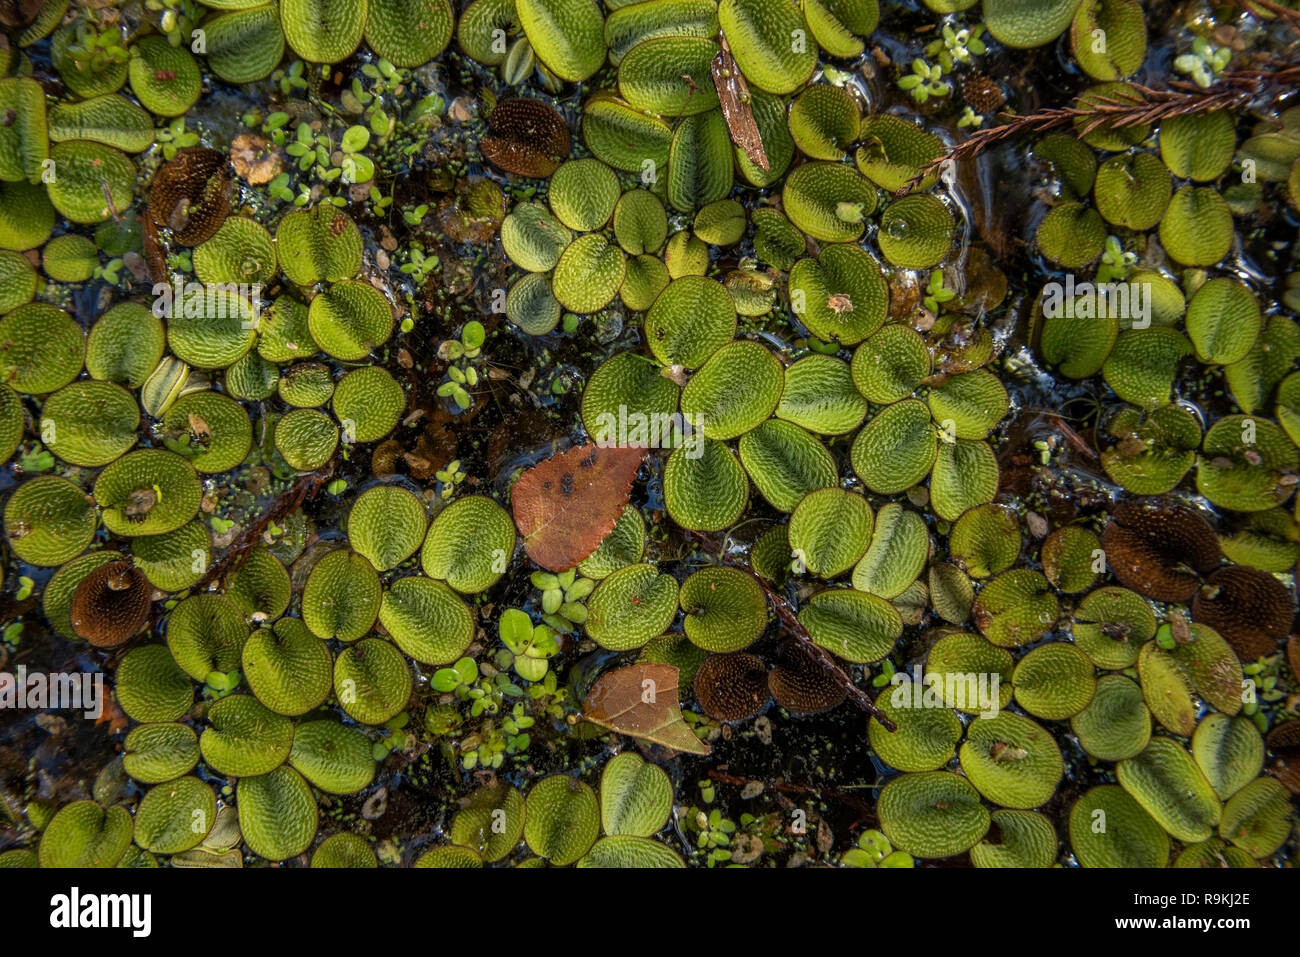 Salvinia minima is a species of aquatic, floating fern that grows on the surface of still waterways. It is usually referred to as common salvinia or w Stock Photo